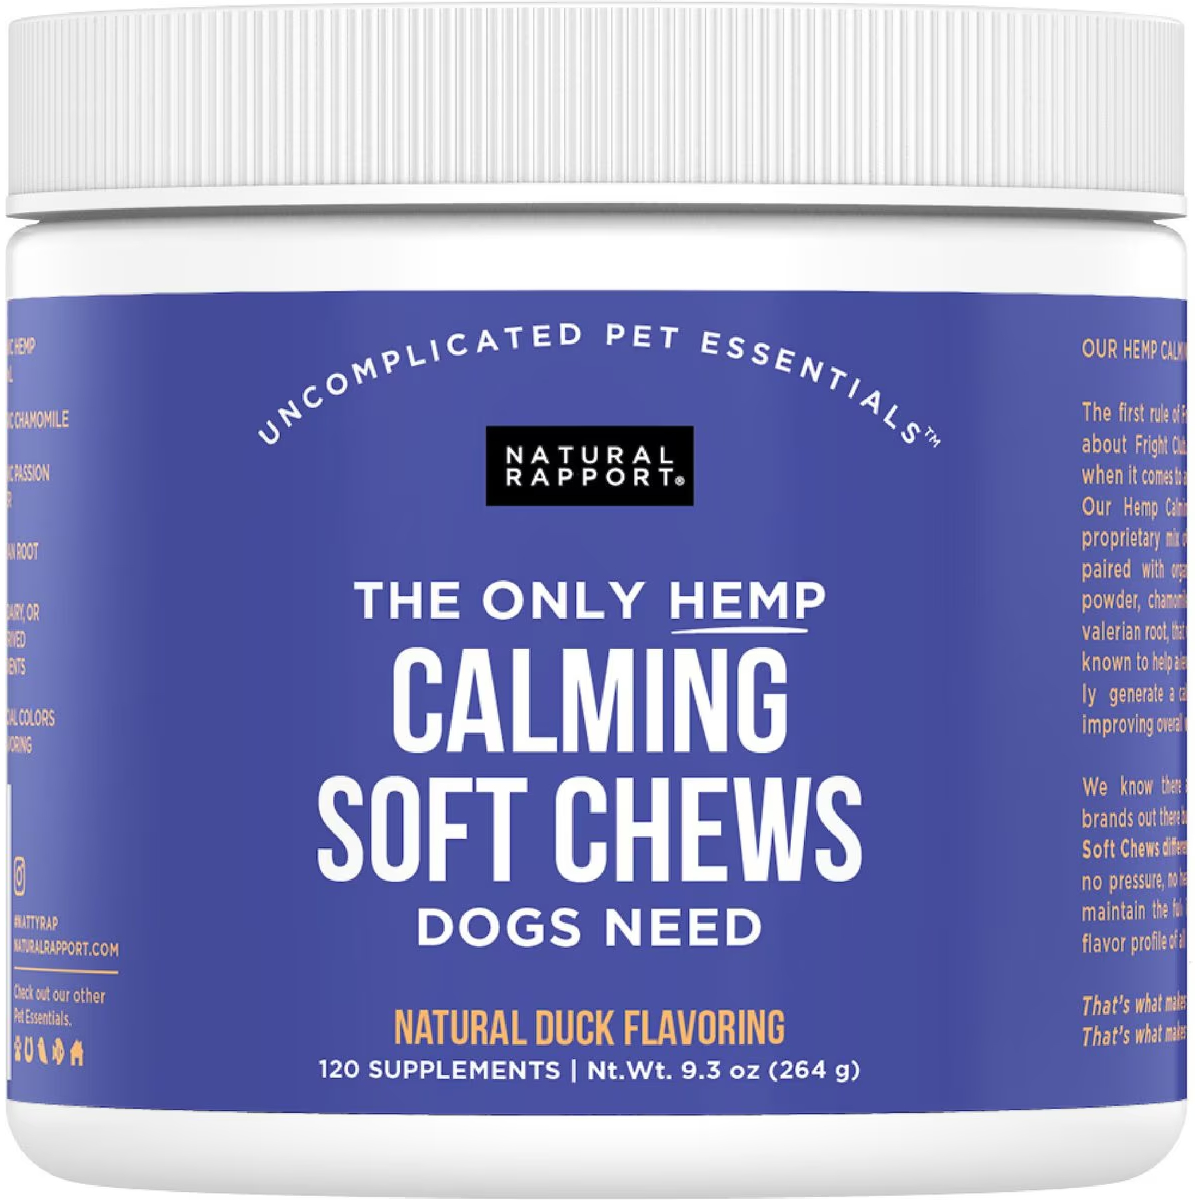 Natural Rapport “The Only Hemp” Dog Treats